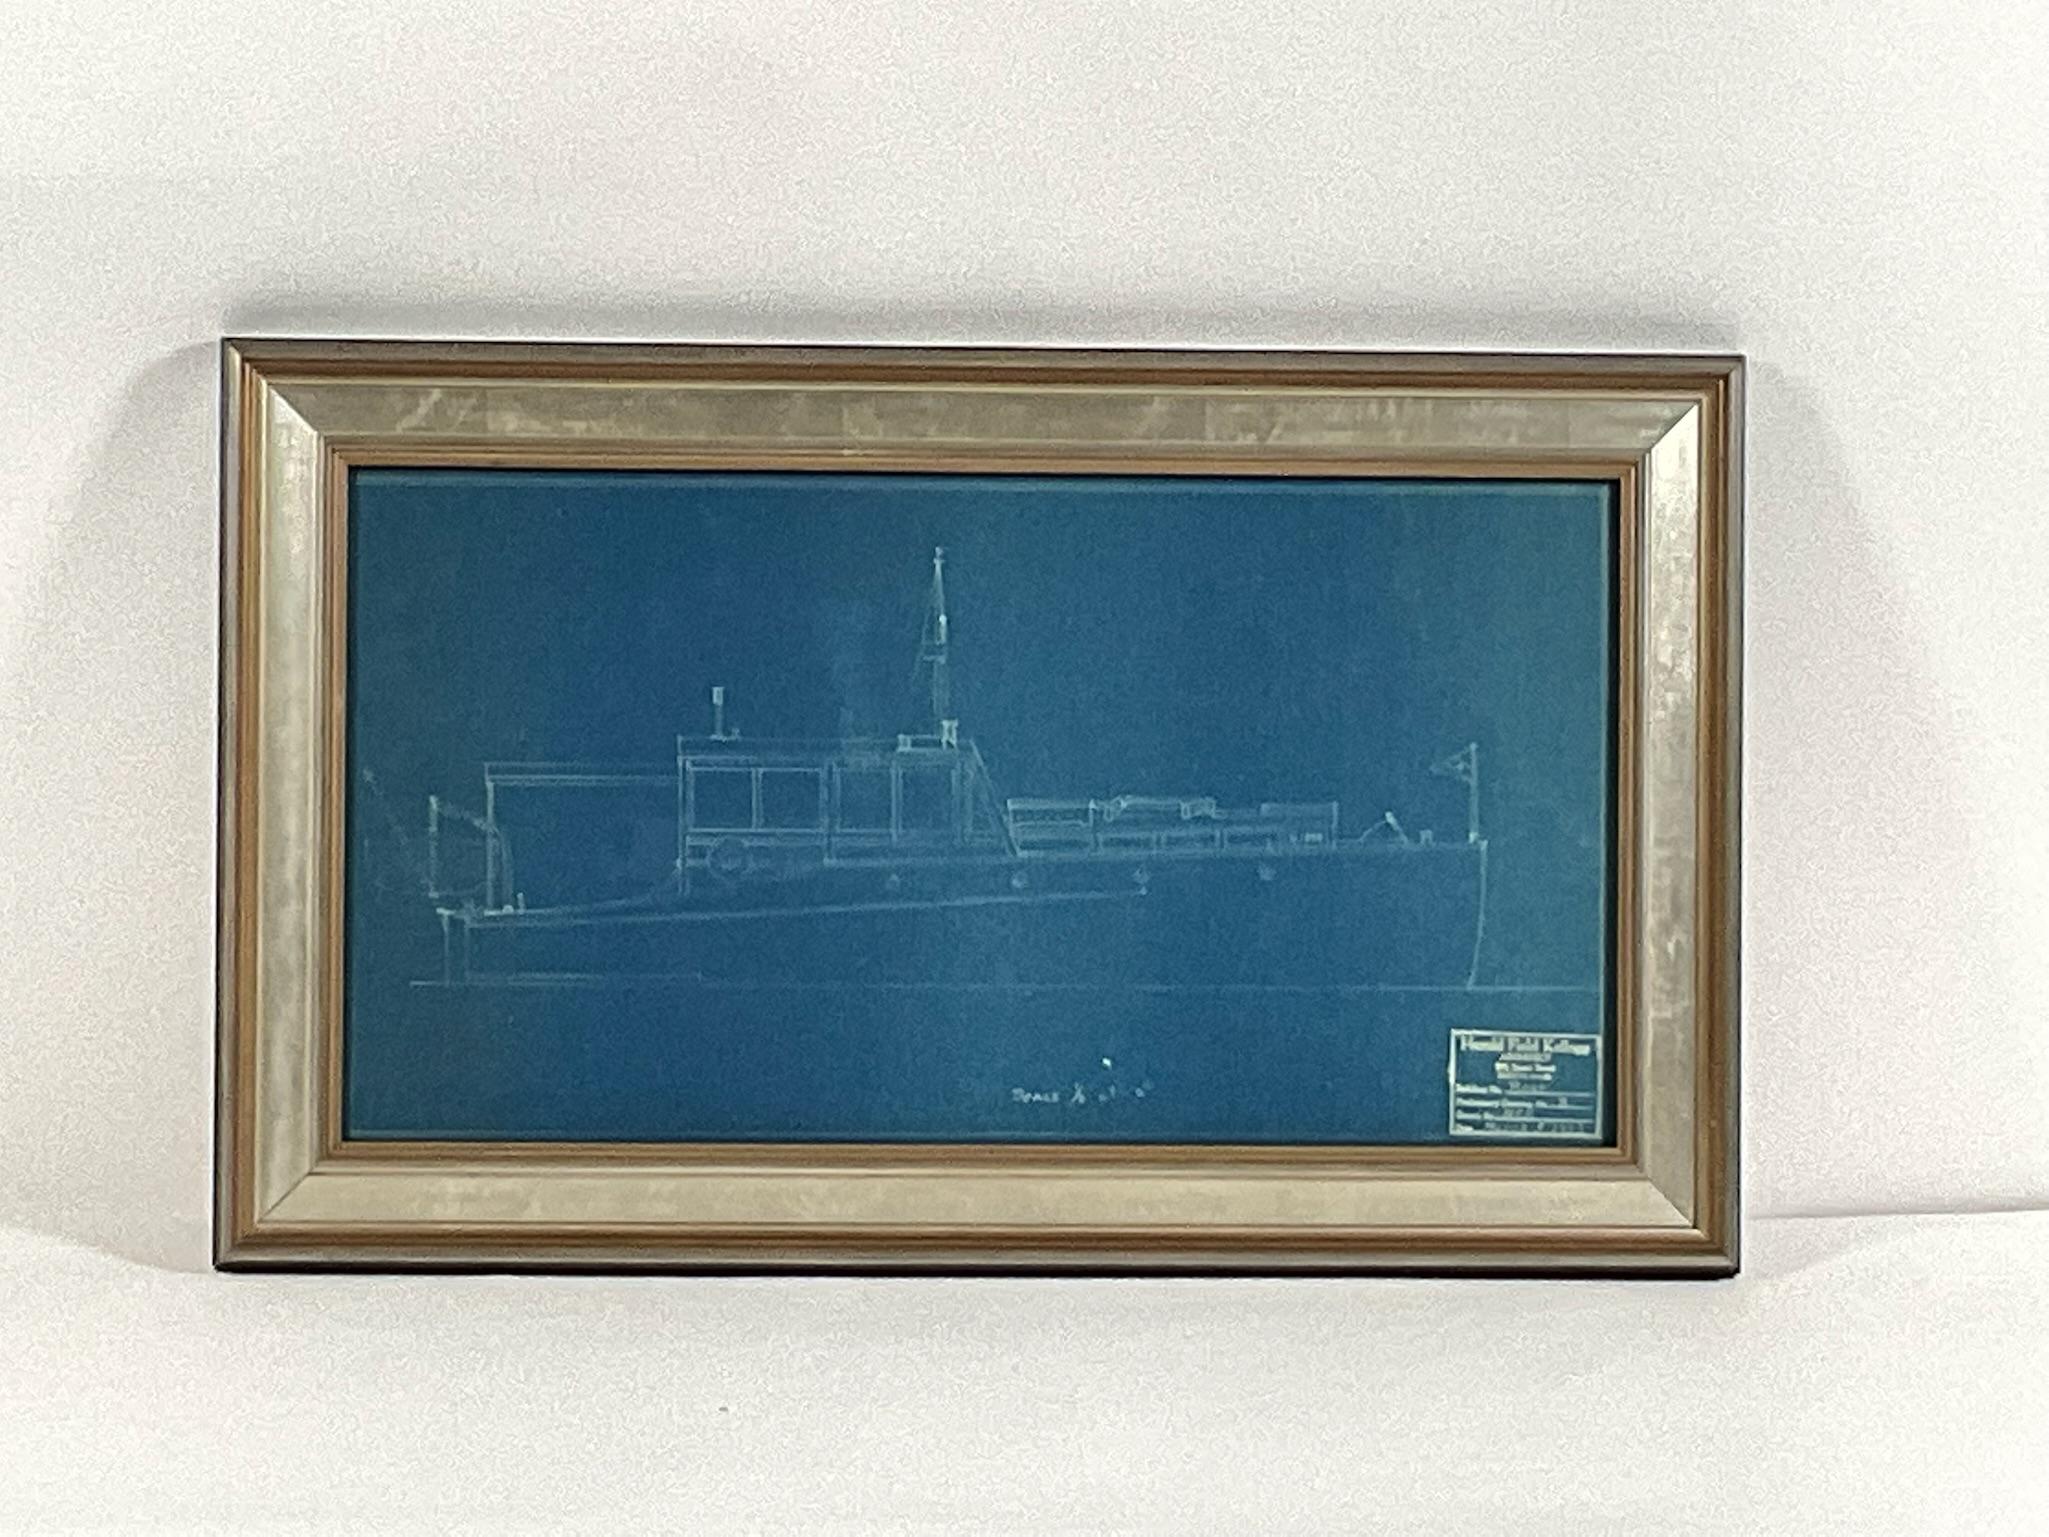 North American Yacht Blueprint by Harold Field Kellogg For Sale